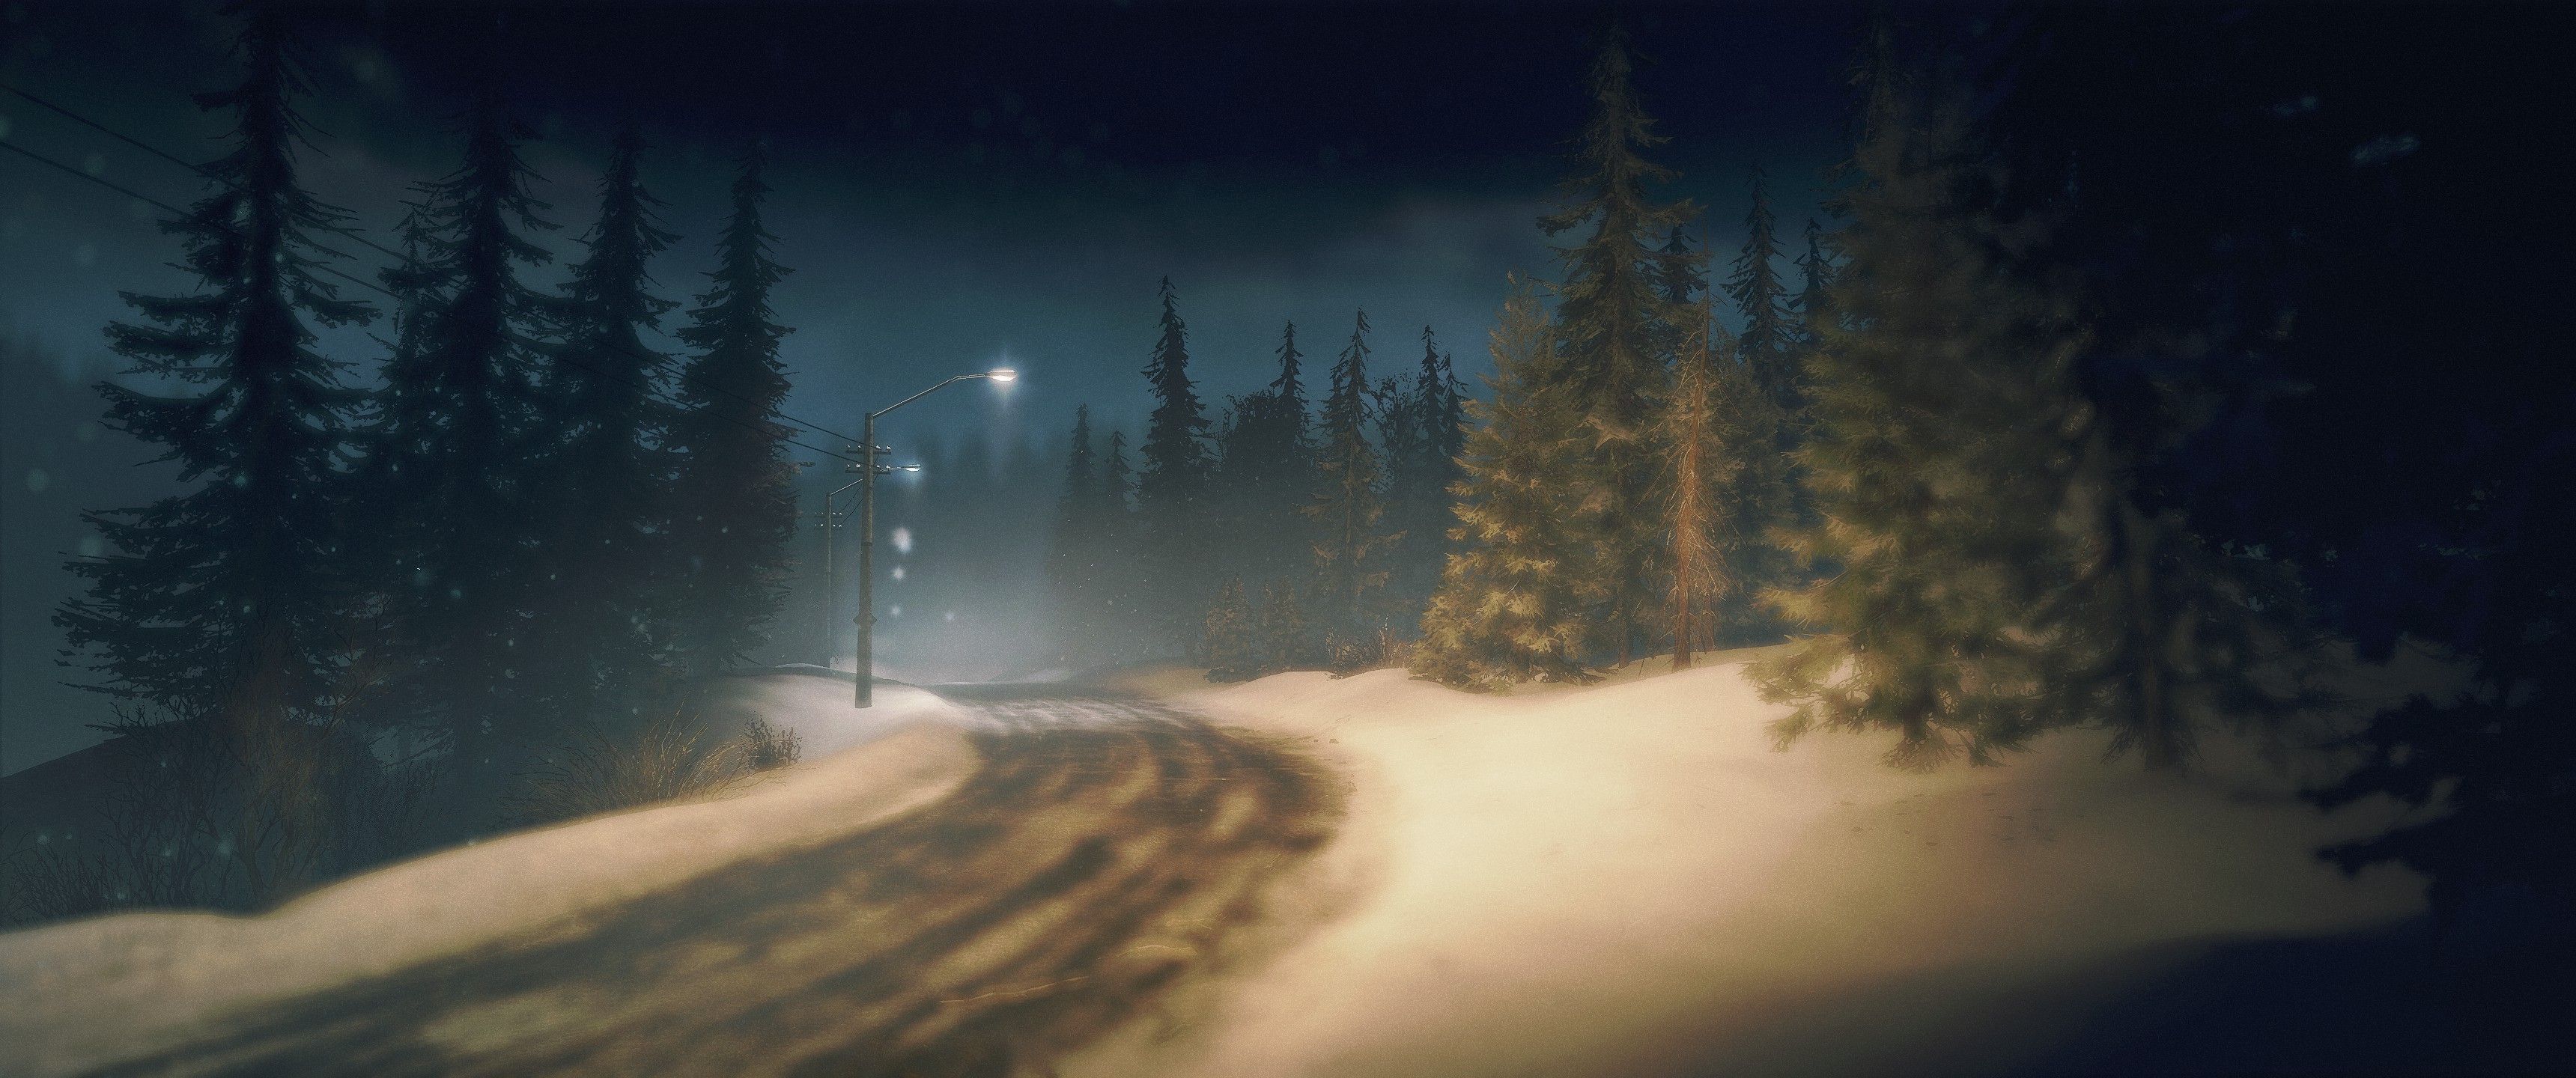 General 3440x1440 nature night CGI snow forest road digital art ultrawide sky street light trees snow covered